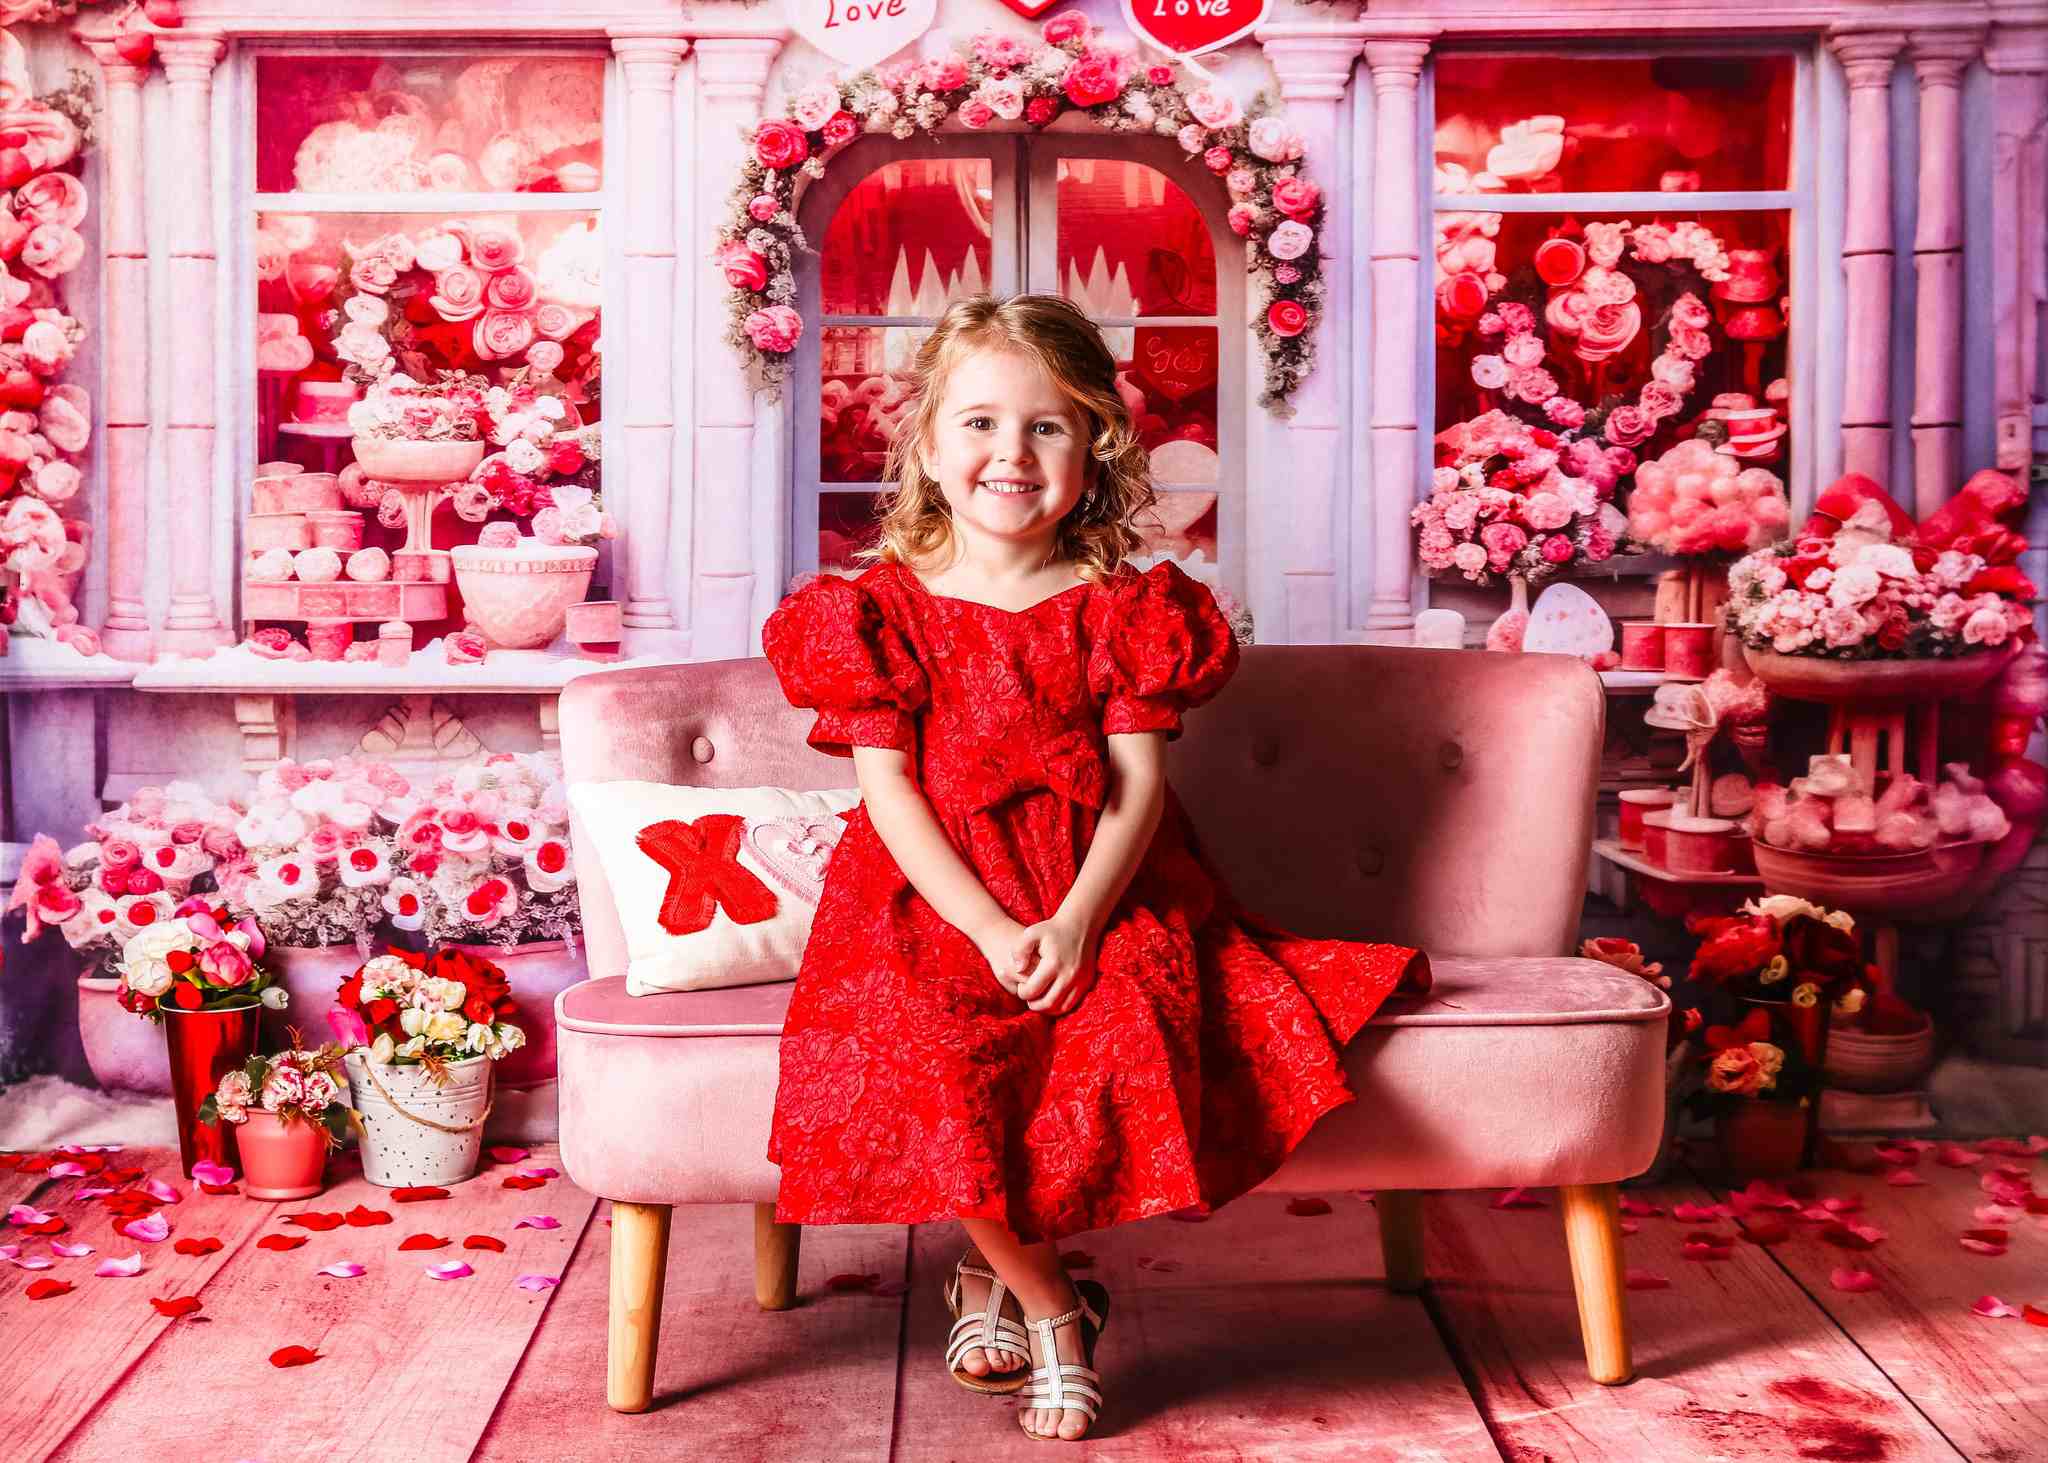 Kate Pink Valentine's Day Flower Shop Backdrop for Photography